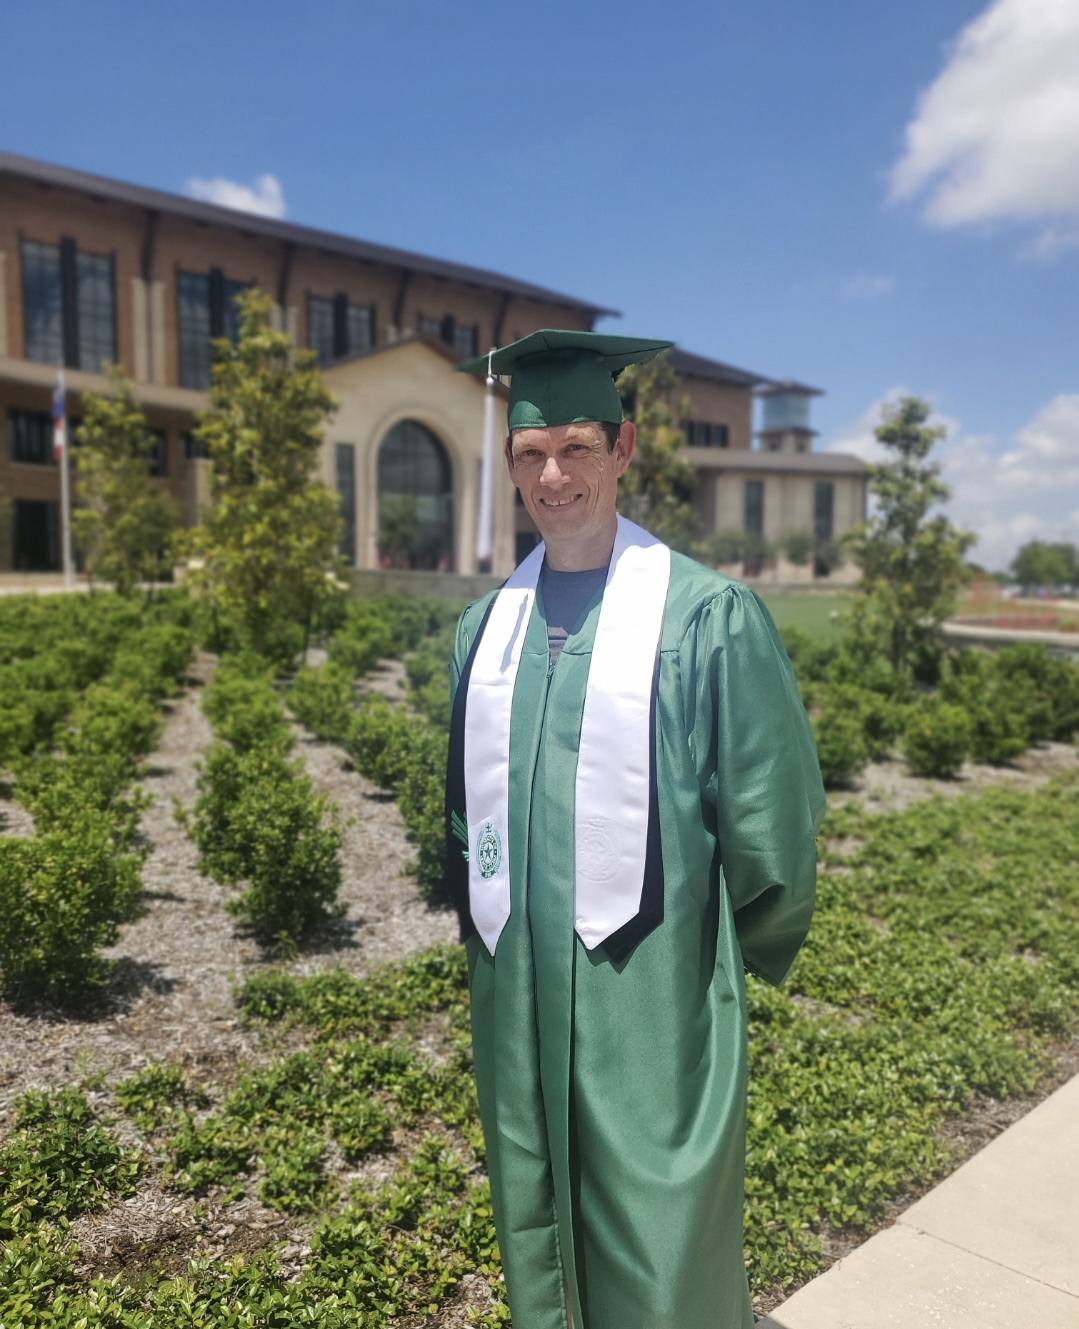 Flip Flippin wears commencement regalia and poses in front of UNT at Frisco